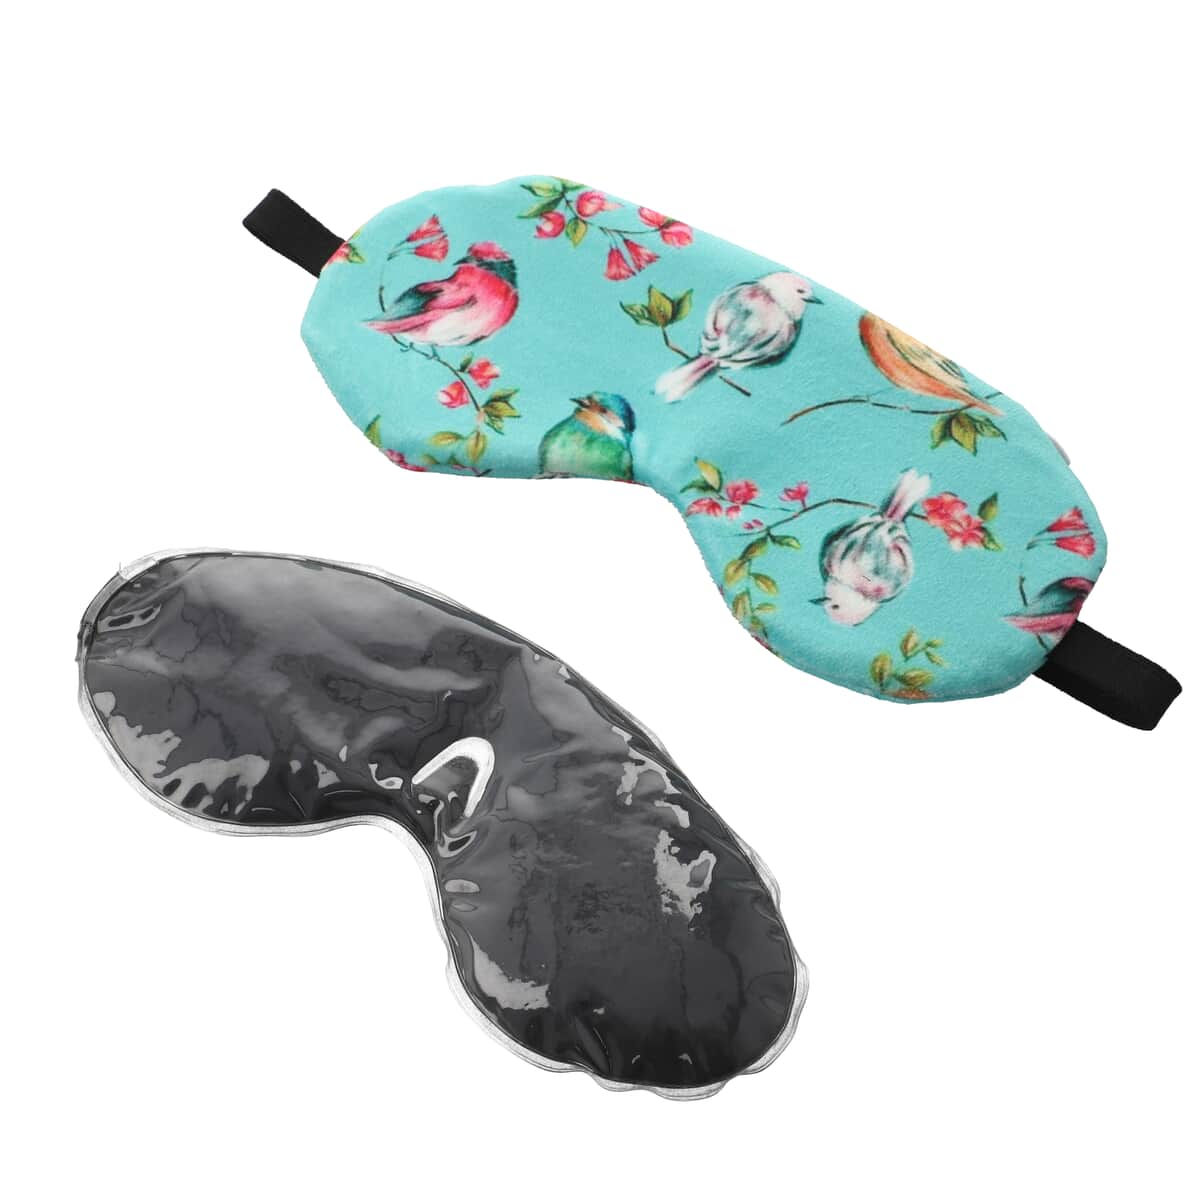 Multi Color Printed Cotton, Shungite Weighted Reusable Eye Mask with Shungite Gel Sleeve and Adjustable Strap image number 0